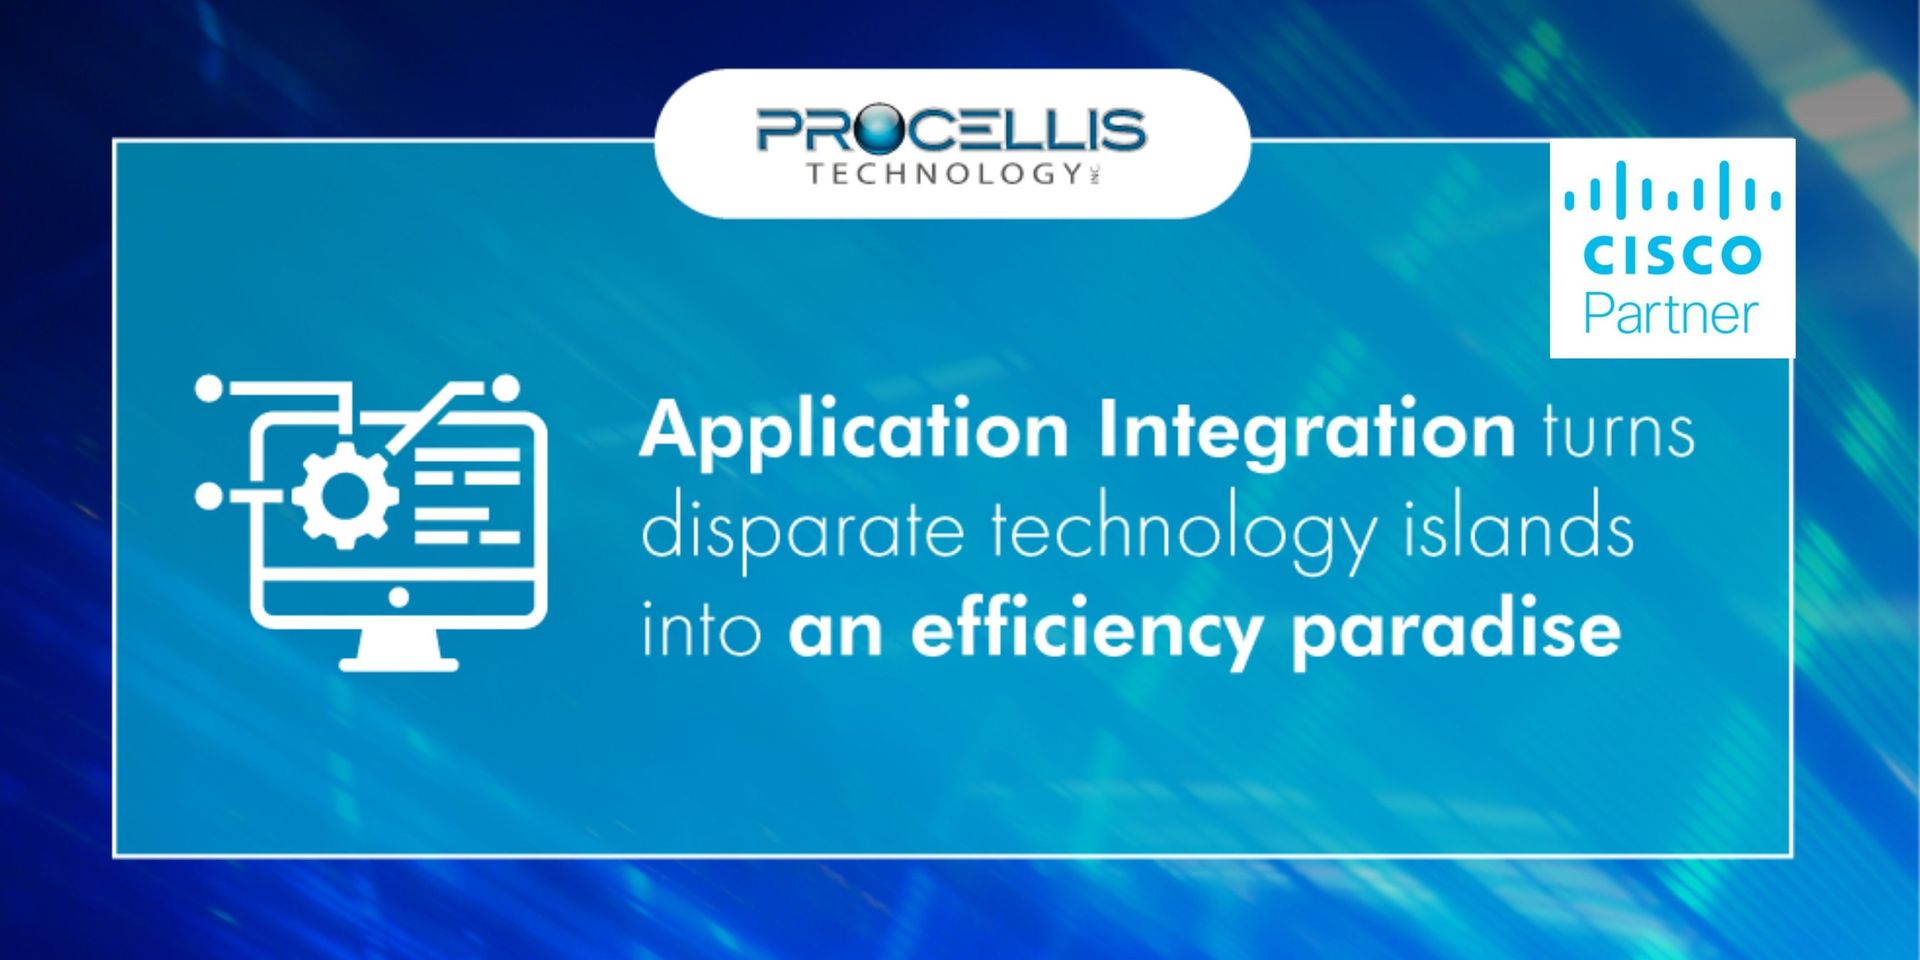 Application Integration turns disparate technology islands into an efficiency paradise.